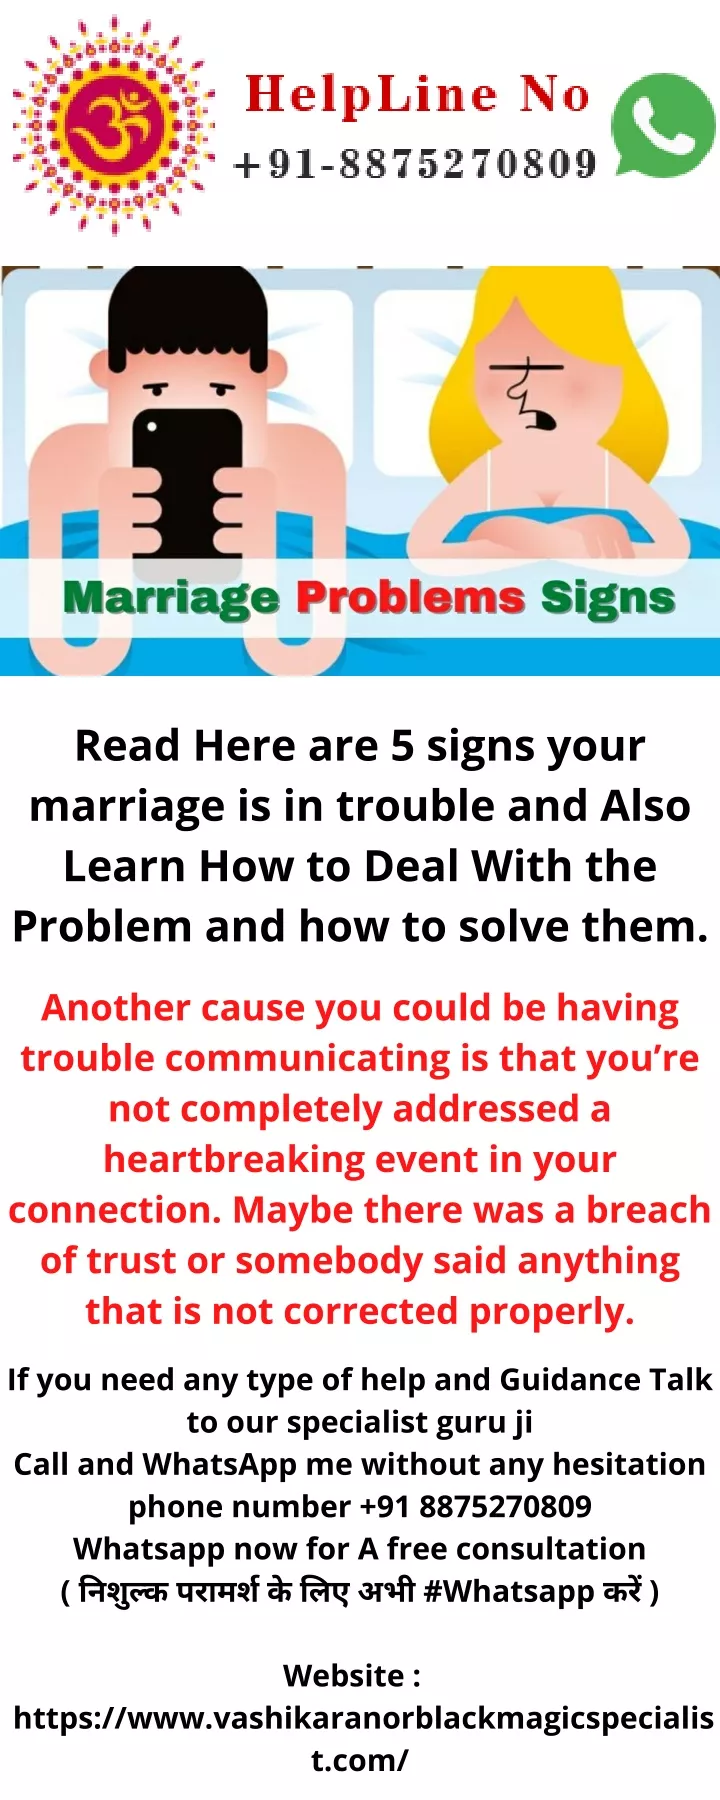 read here are 5 signs your marriage is in trouble